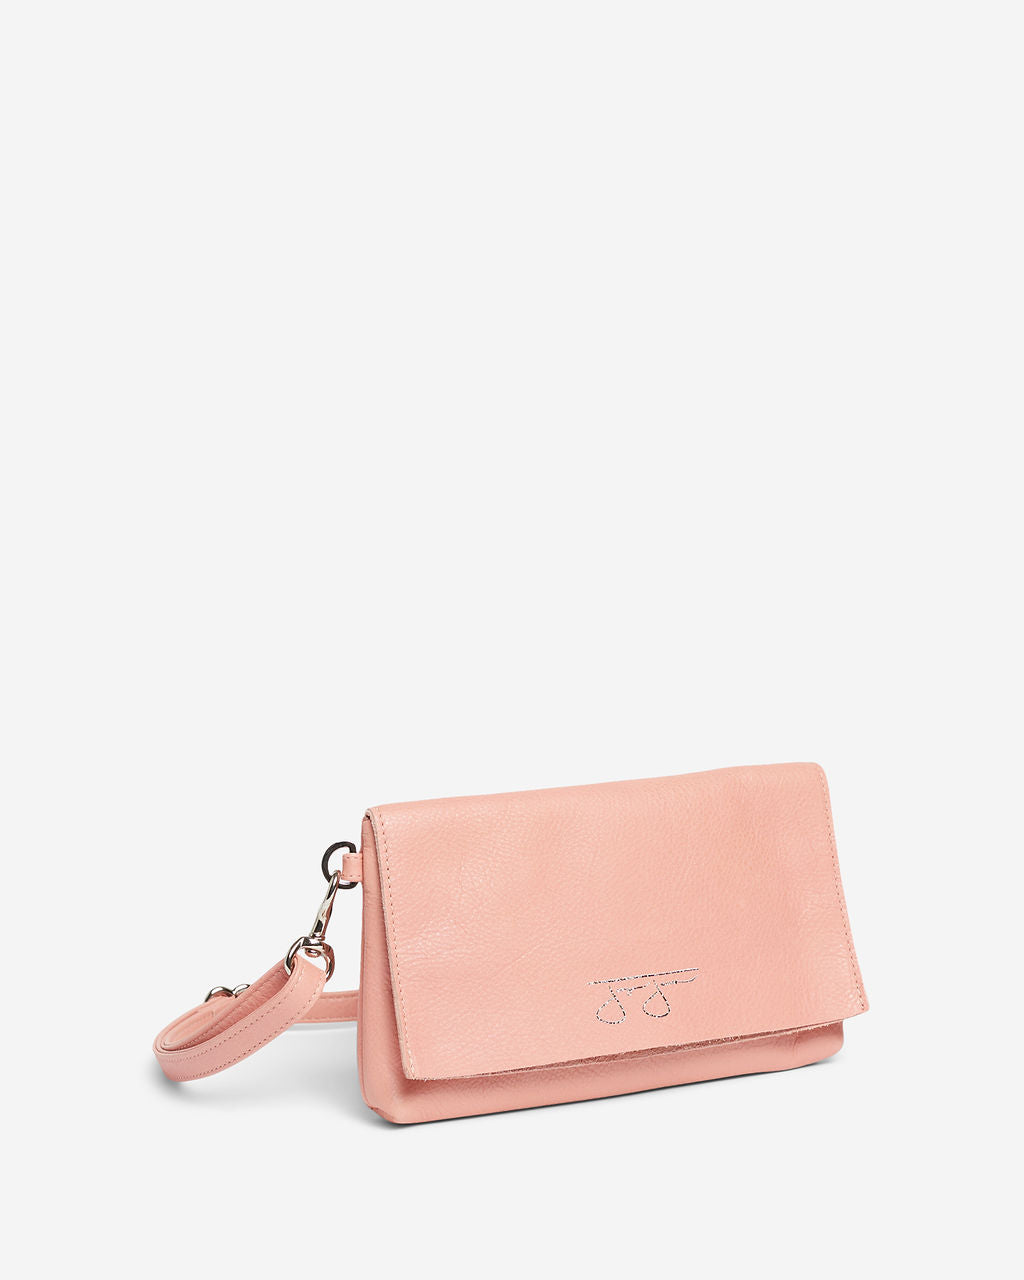 Norma Hipster Bag - Buffed Pink  Joey James, The Label   